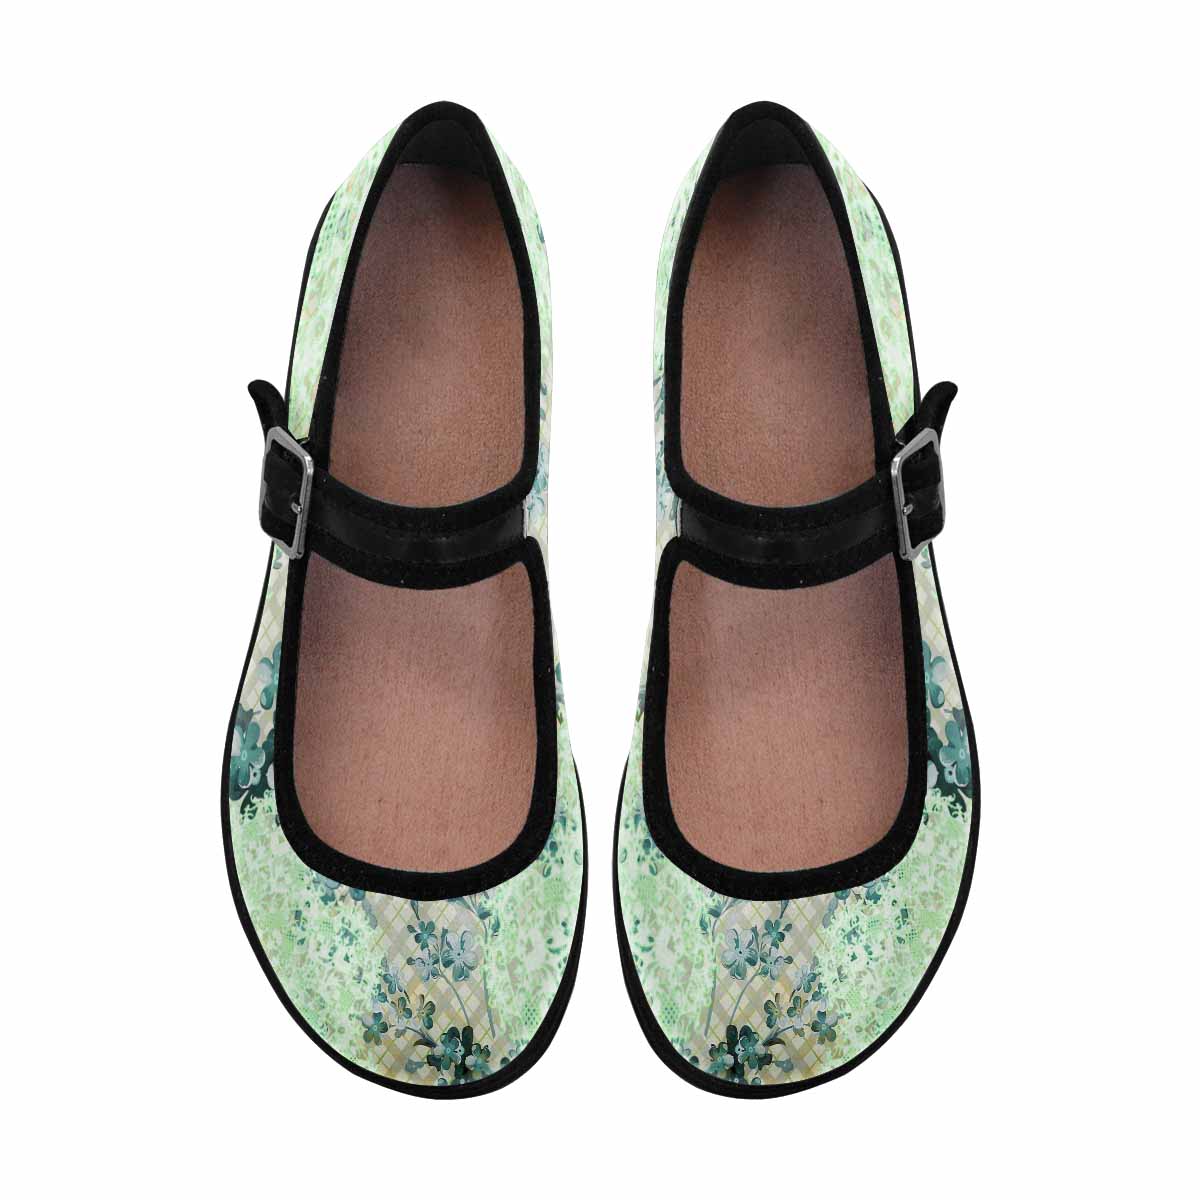 Victorian lace print, cute, vintage style women's Mary Jane shoes, design 53